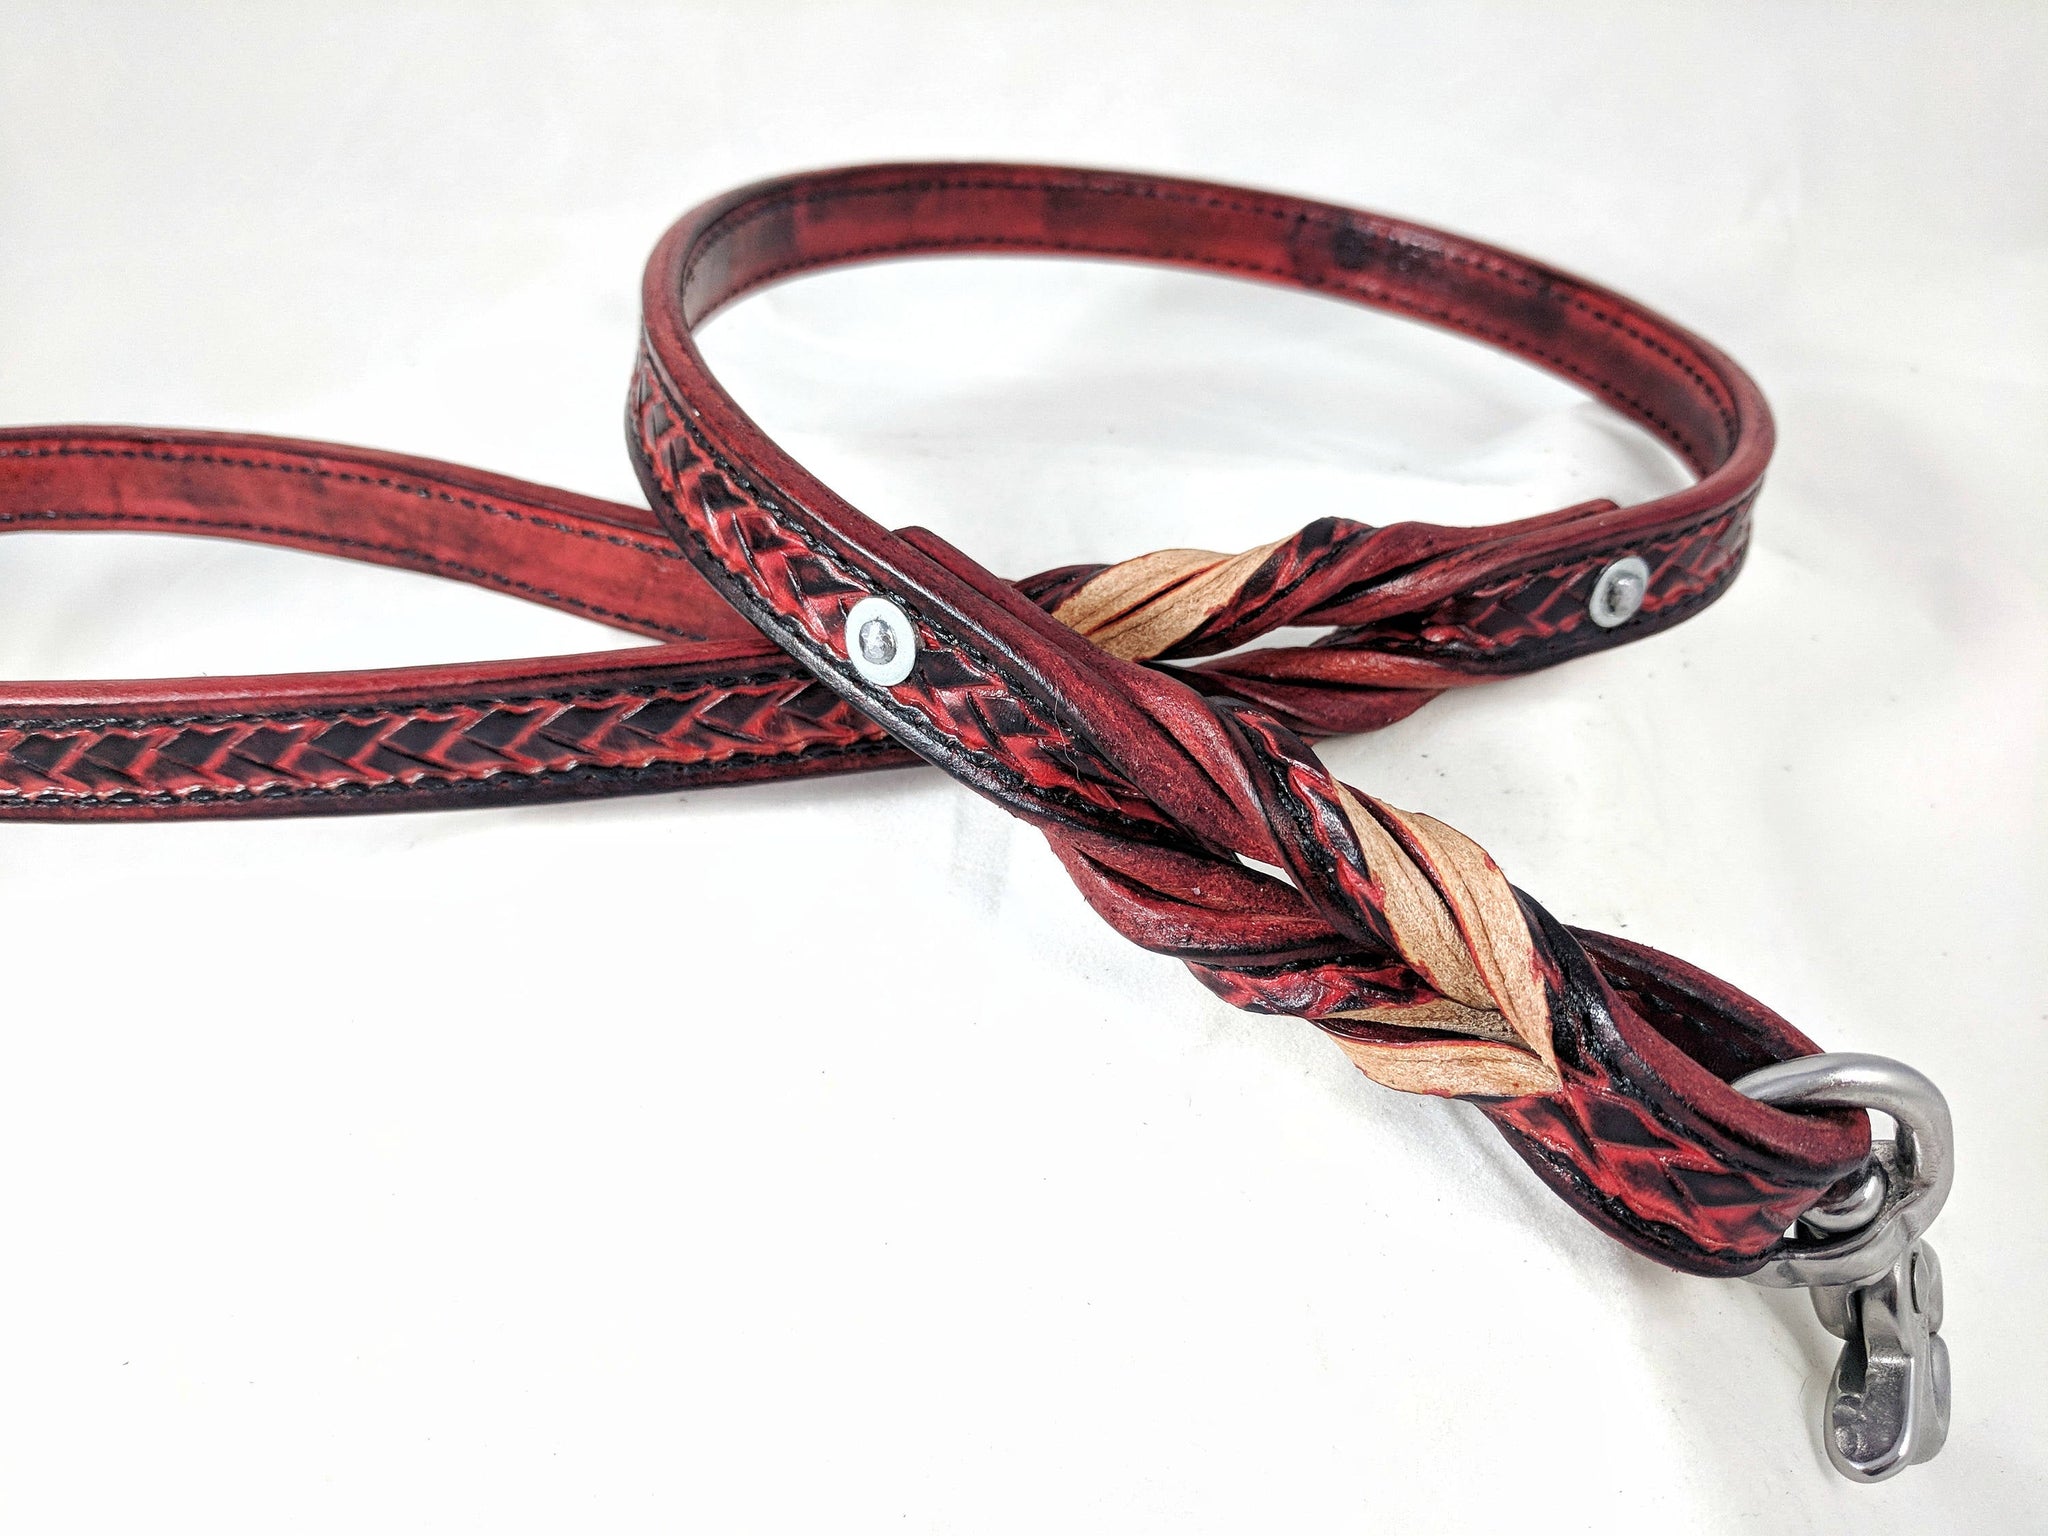 "Dirty Red" Stainless Steel Leather Bondage Leash